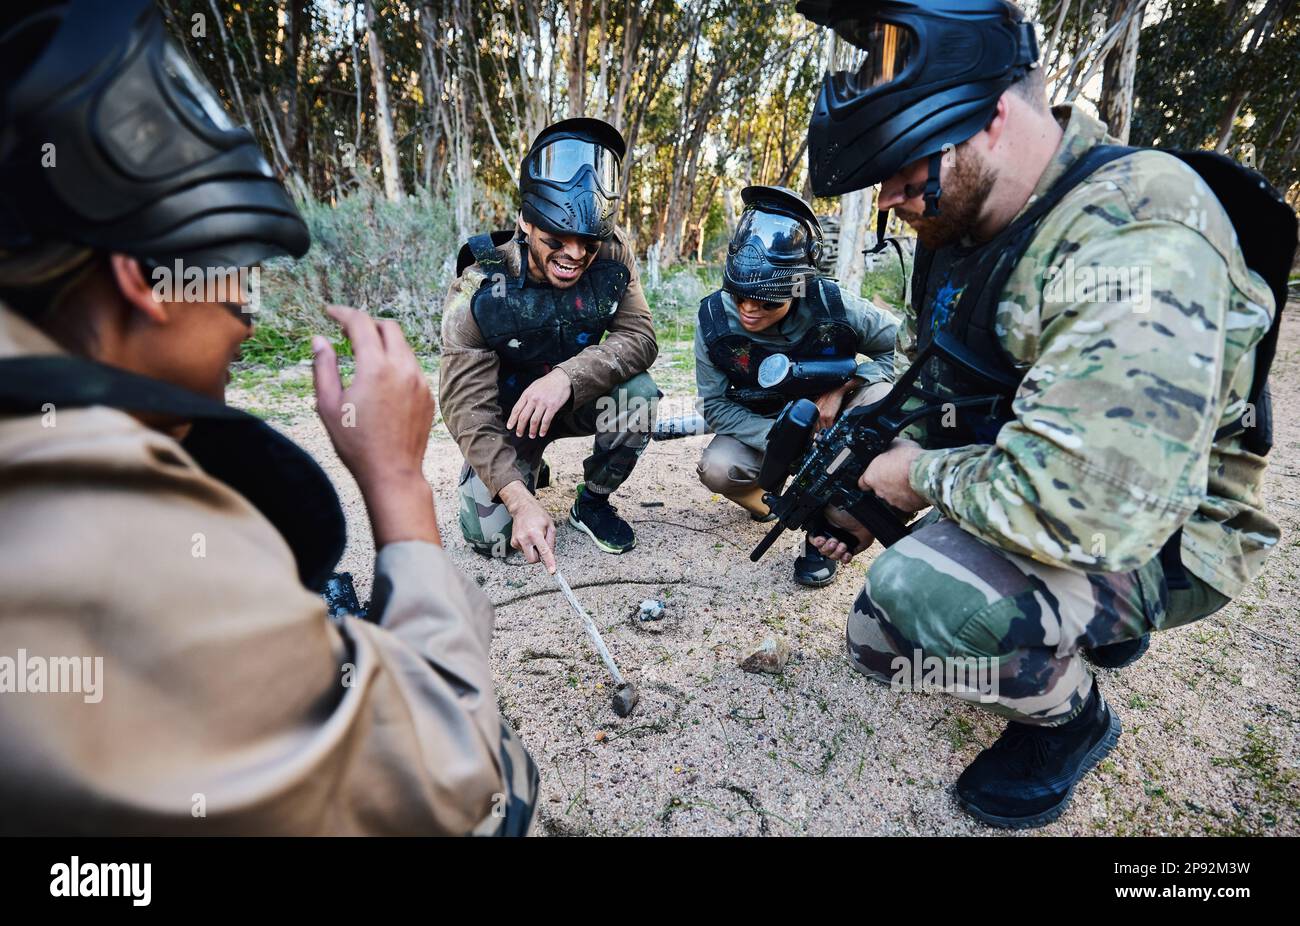 Paintball, team and military strategy with mission, teamwork and